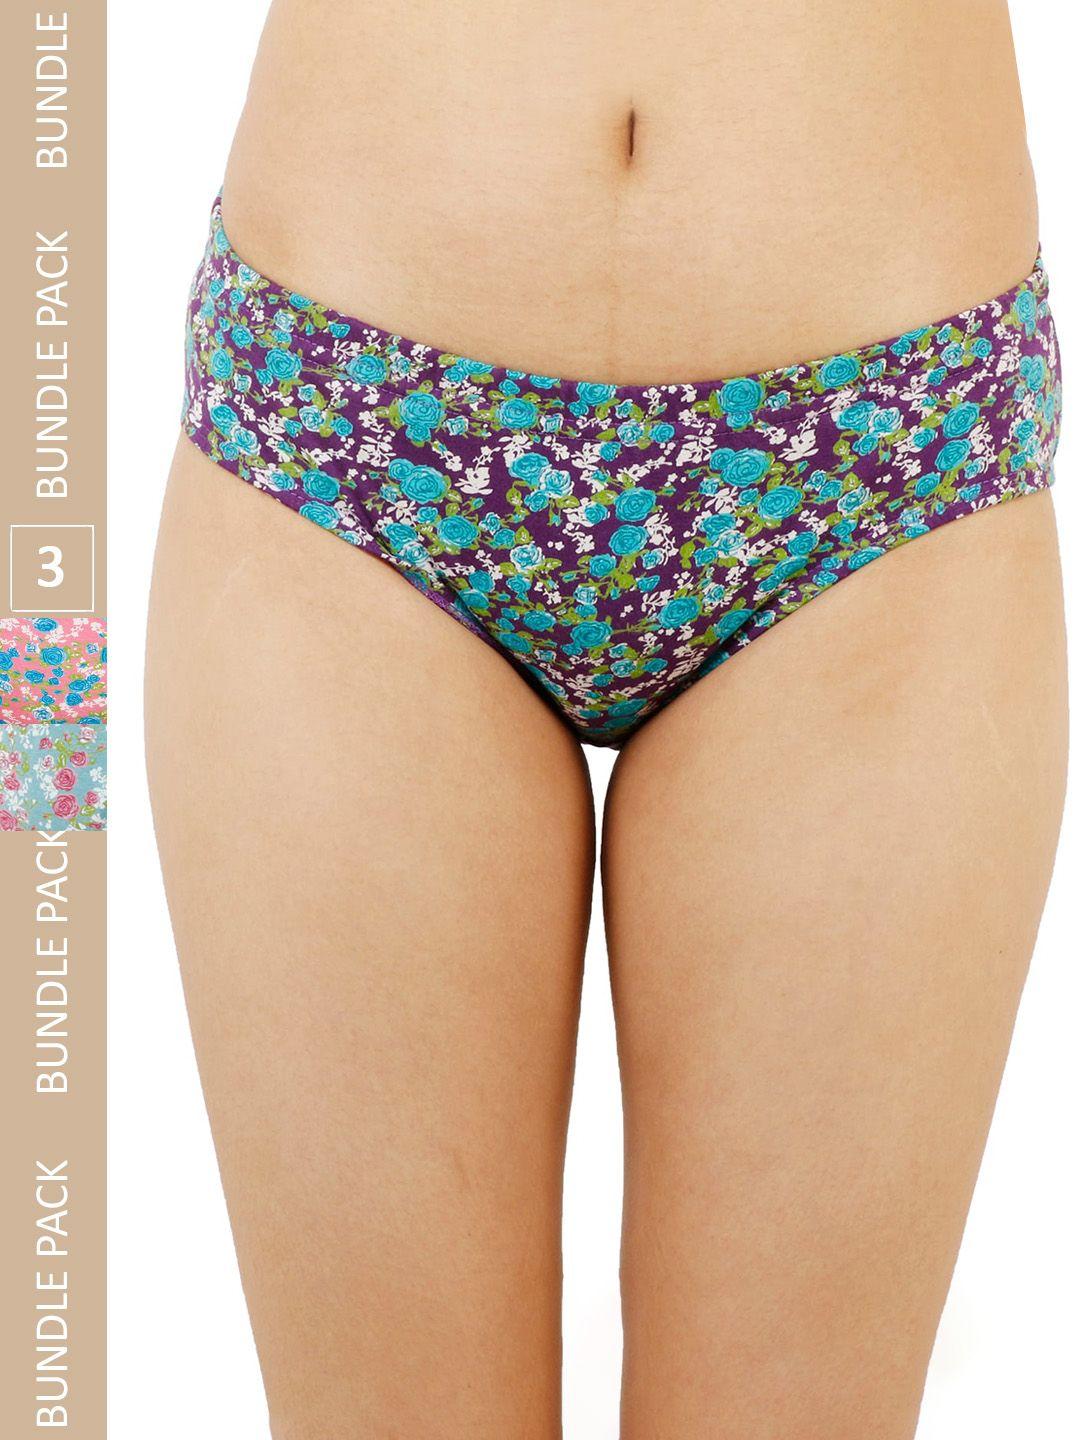 ladyland women pack of 3 assorted floral printed cotton hipster briefs